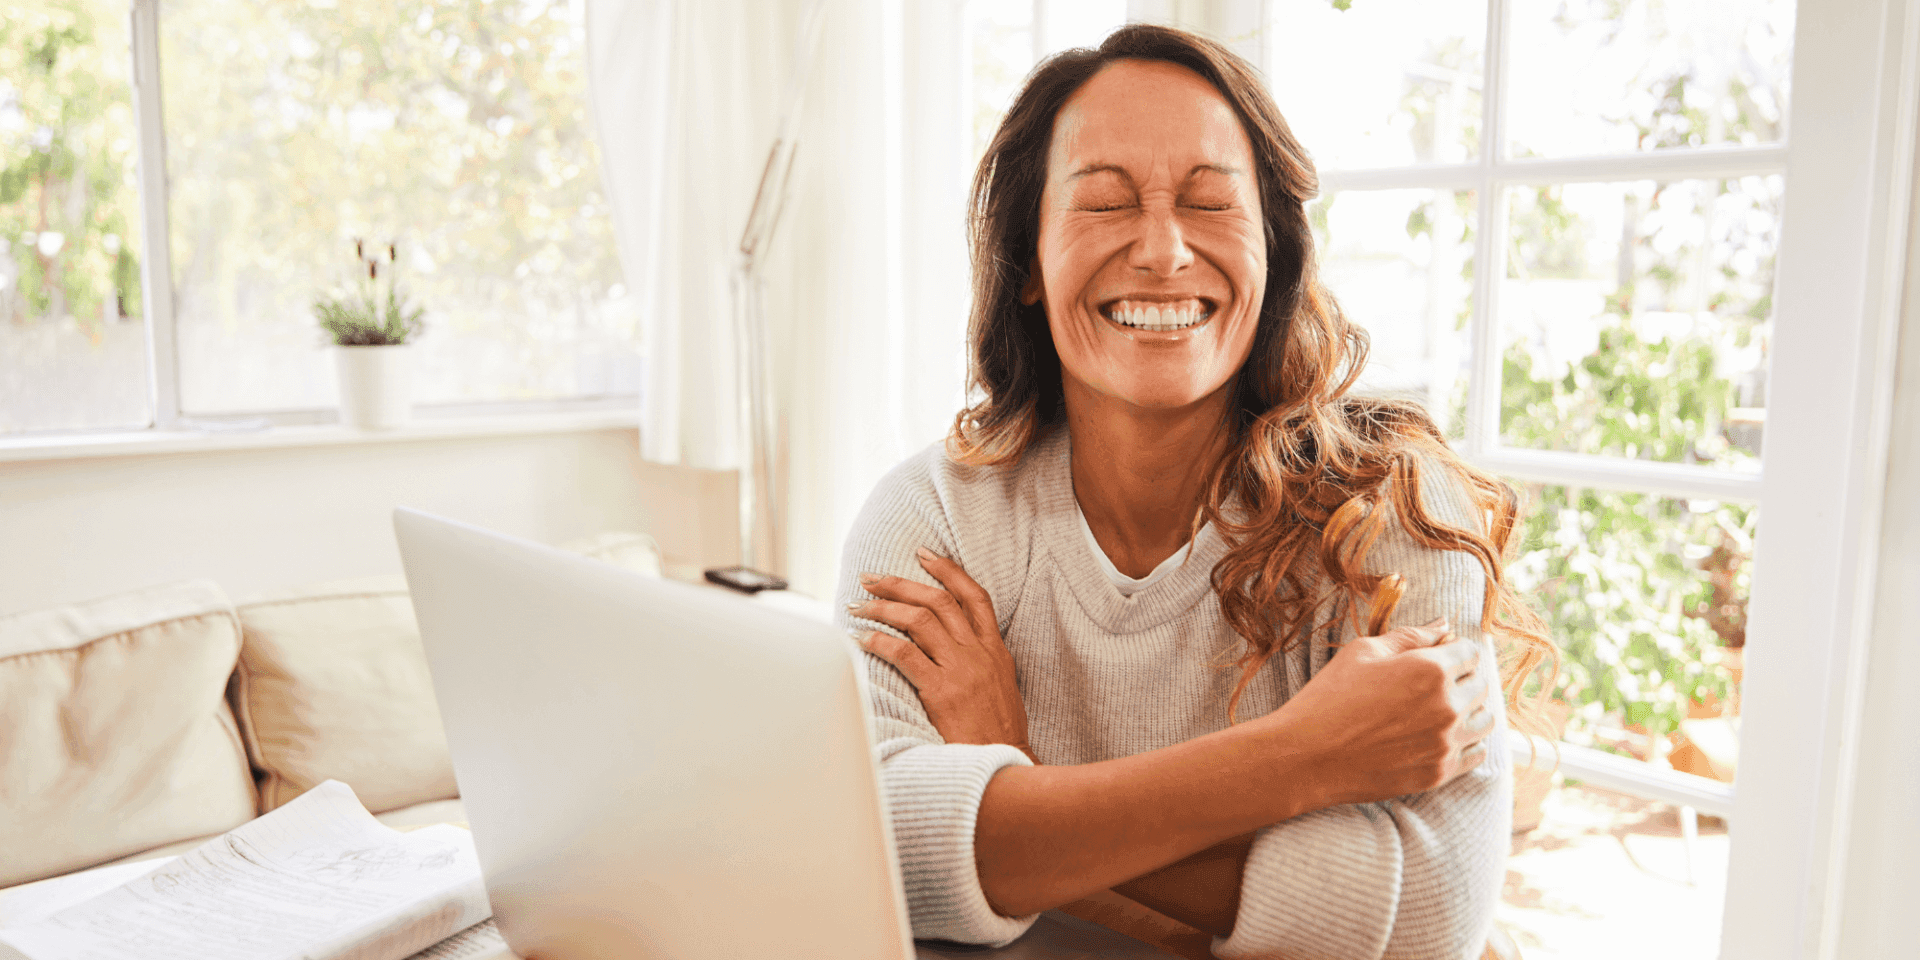 A woman sitting in front of her laptop, smiling with her eyes closed (demonstrating the use of humor in psychotherapy).